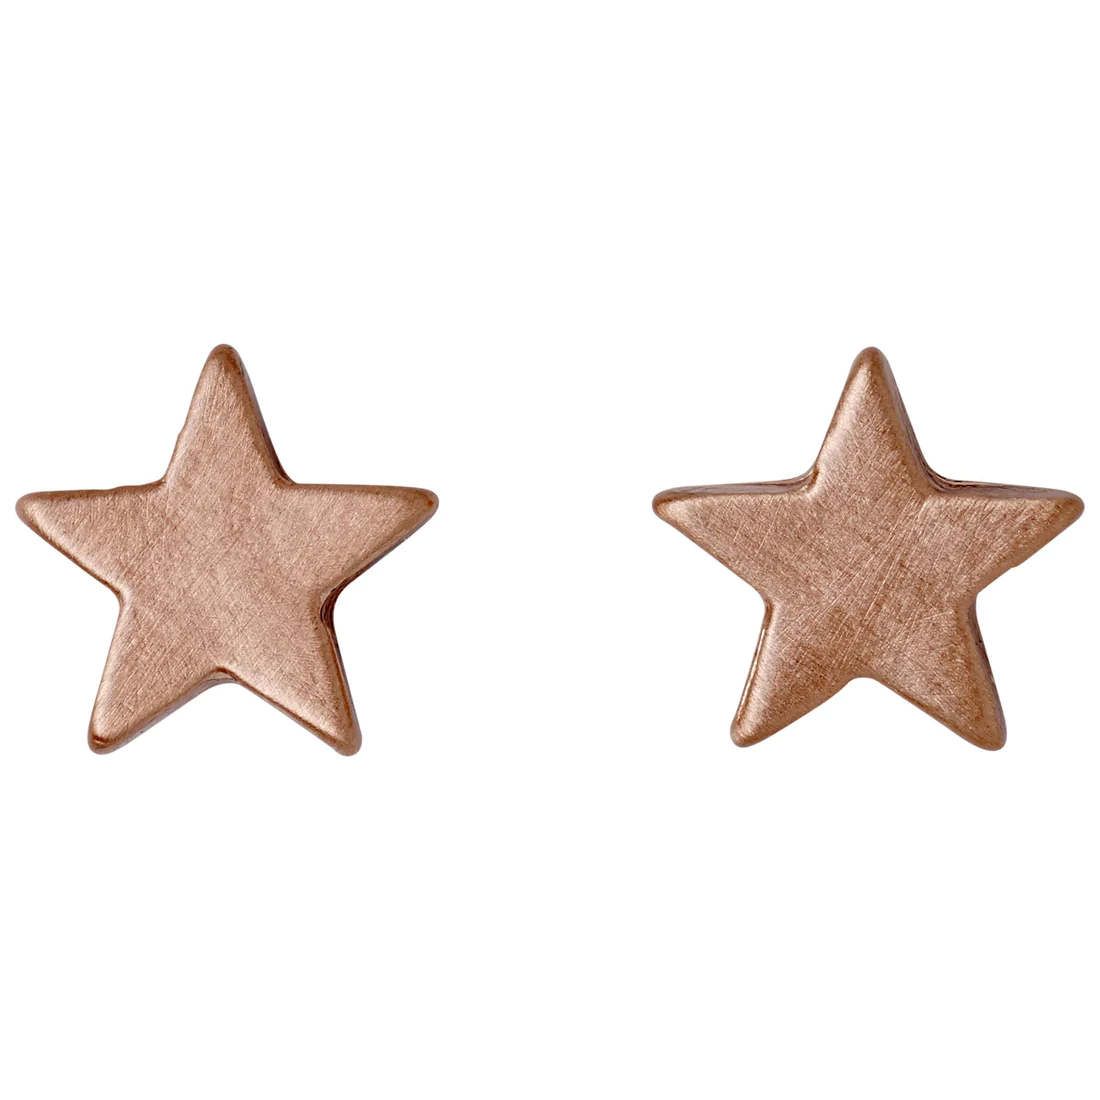 Pilgrim Ava Star Earring - Rose Gold Accessories - Jewelry - Earrings by Pilgrim | Grace the Boutique